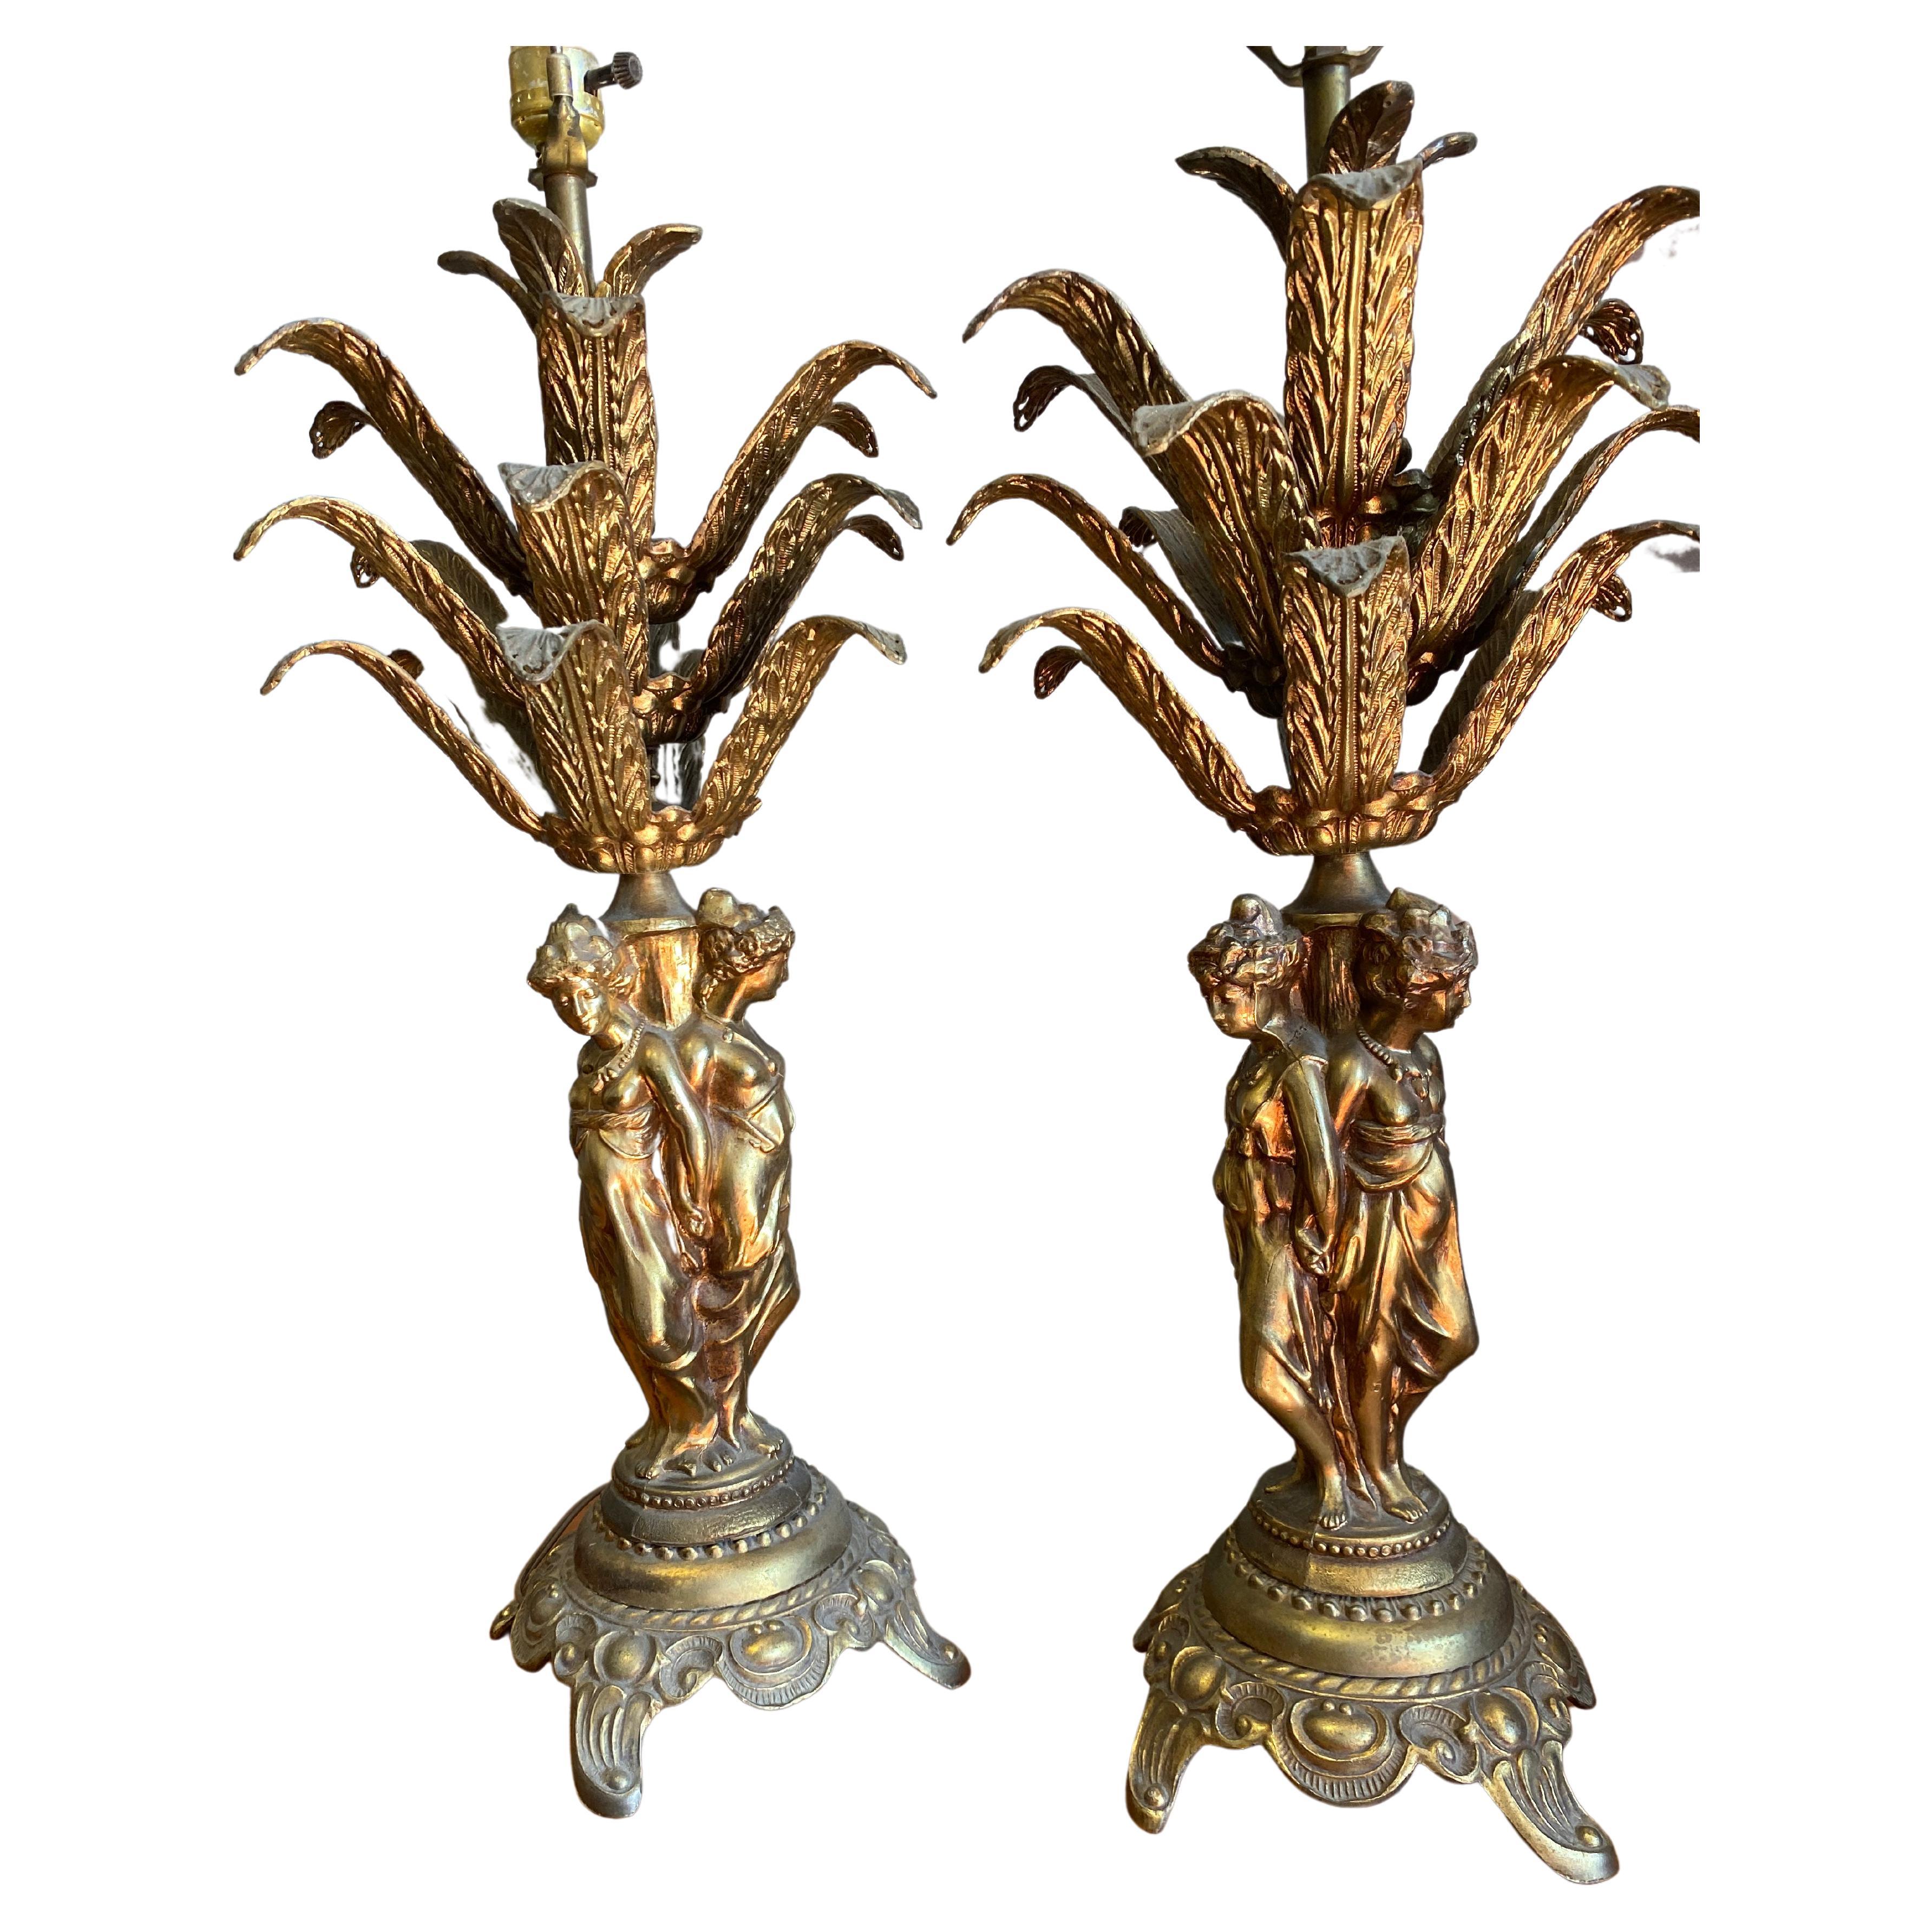 Beautiful vintage brass lamps. The shades for the lamps are simply gorgeous. The design of the lamps with the overhanging palm leaves are breath taking. Such statement pieces for your home. Hanging crystals also included as photographed. There are